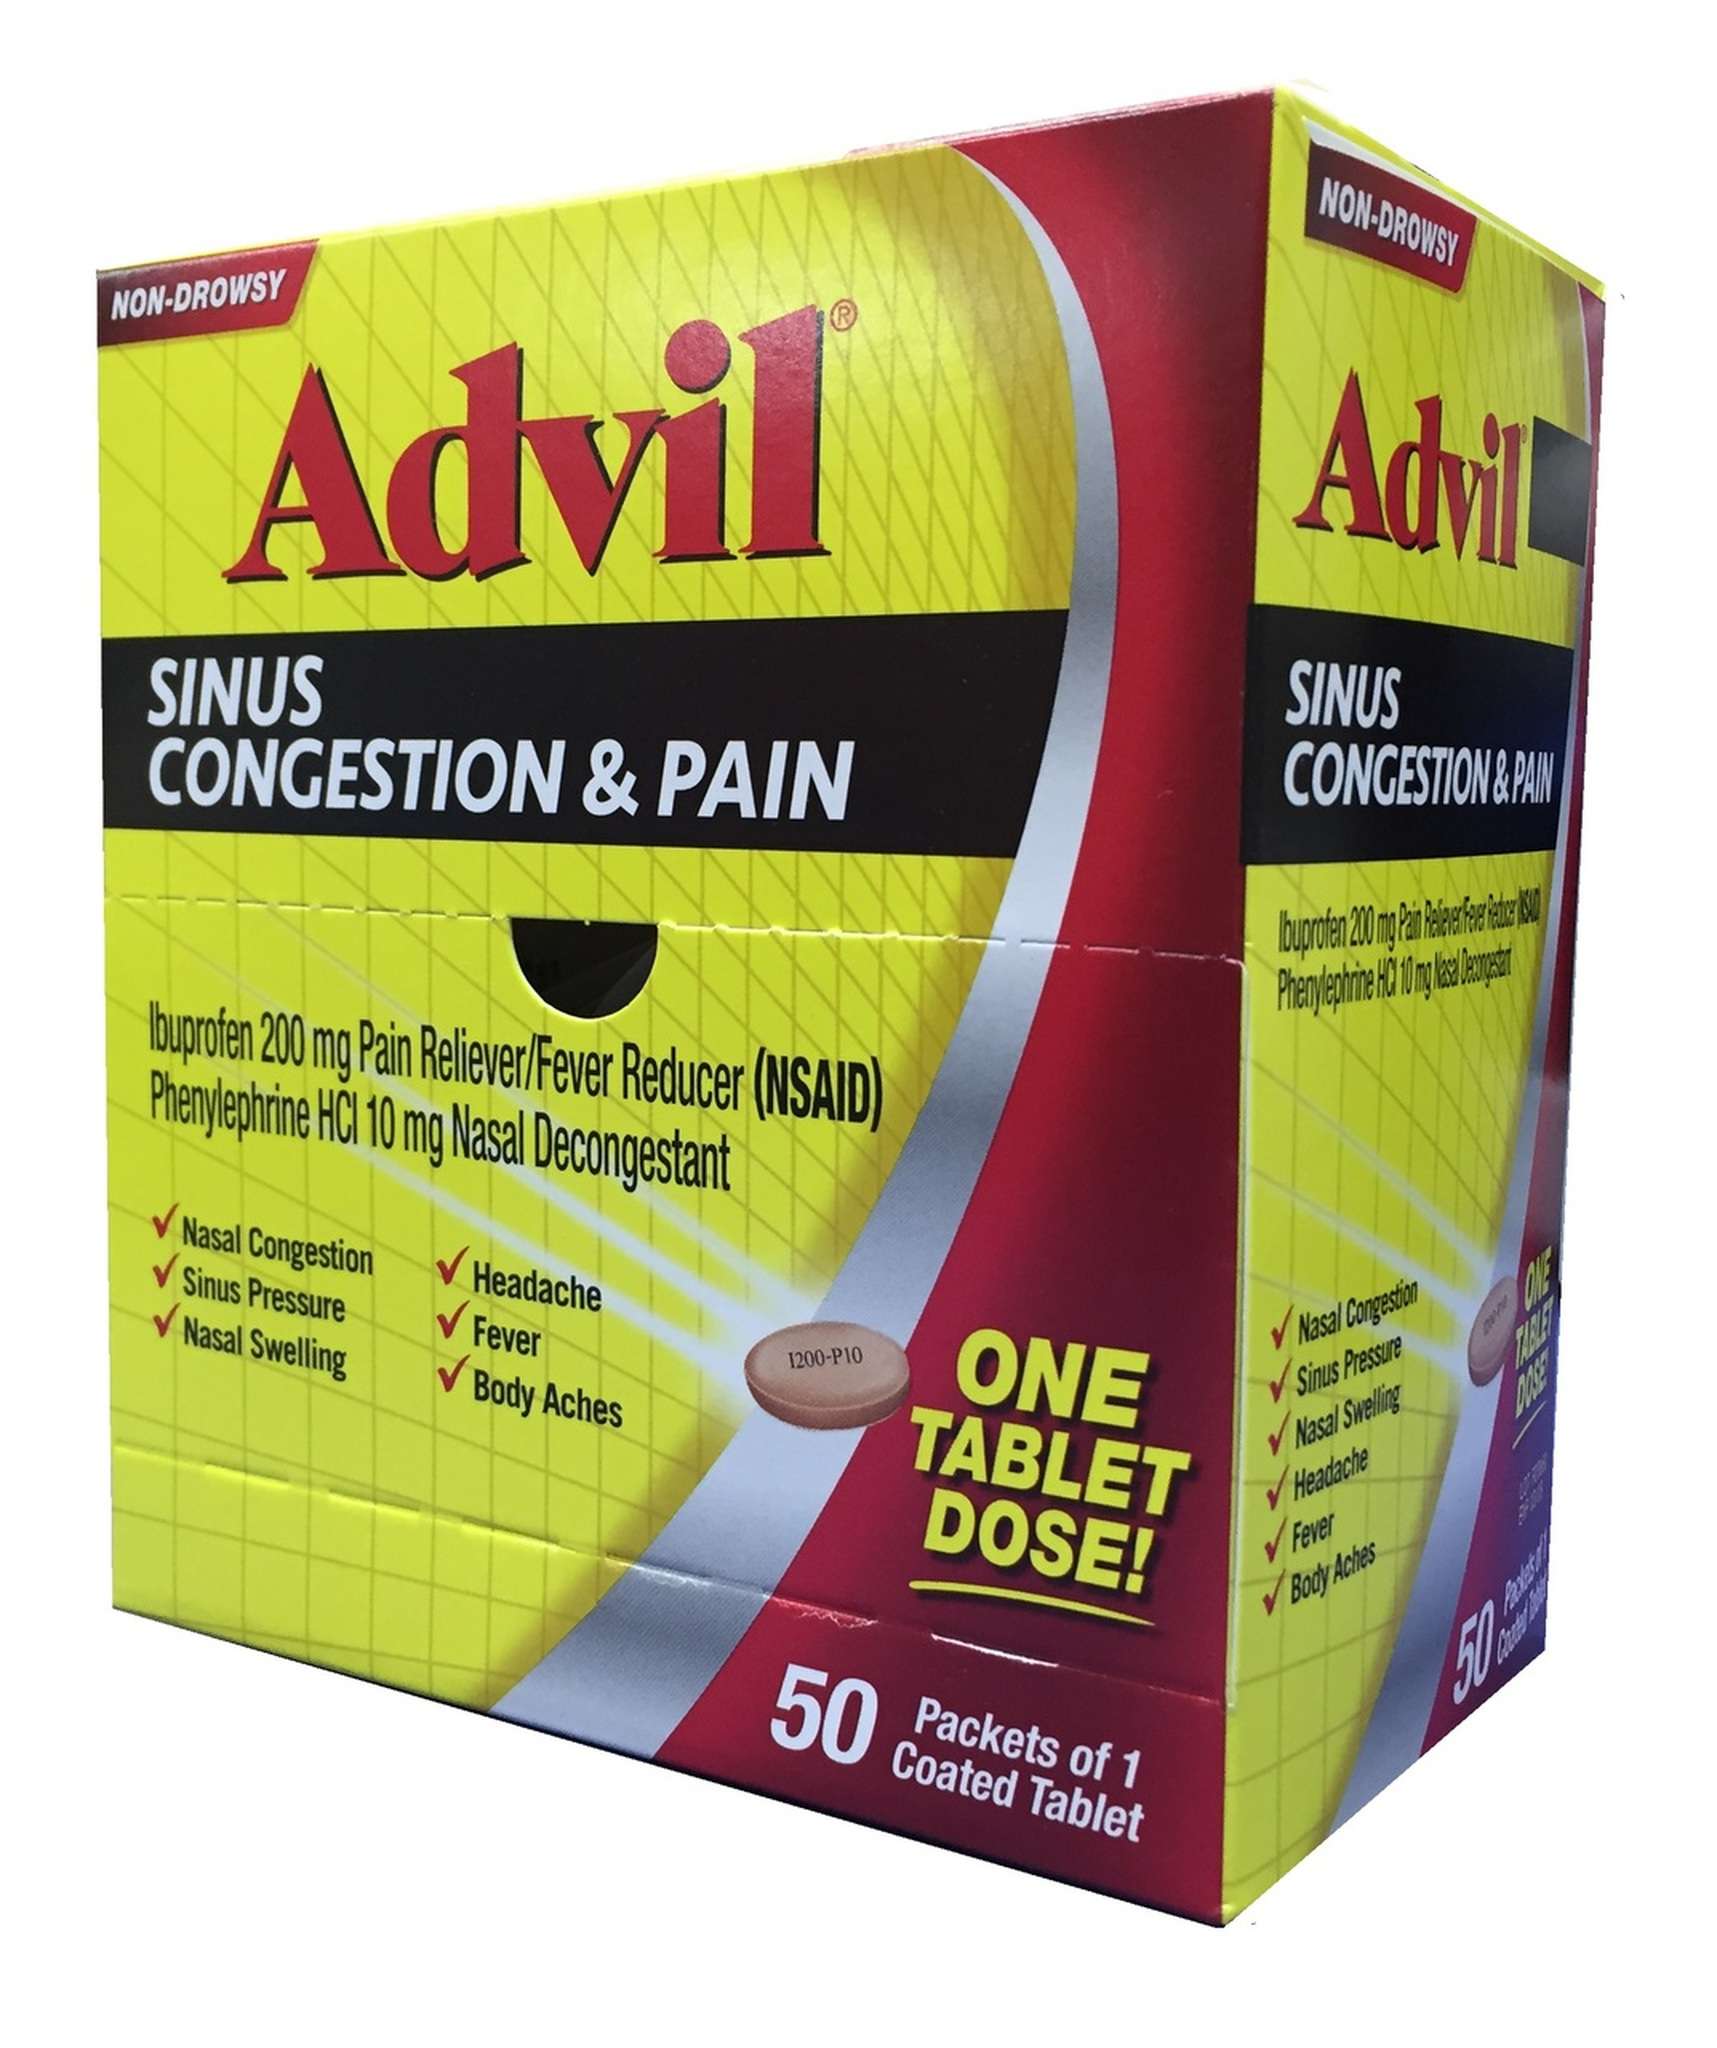 Advil Sinus Congestion &  Pain, 50 Packets of 1 Tablet ...